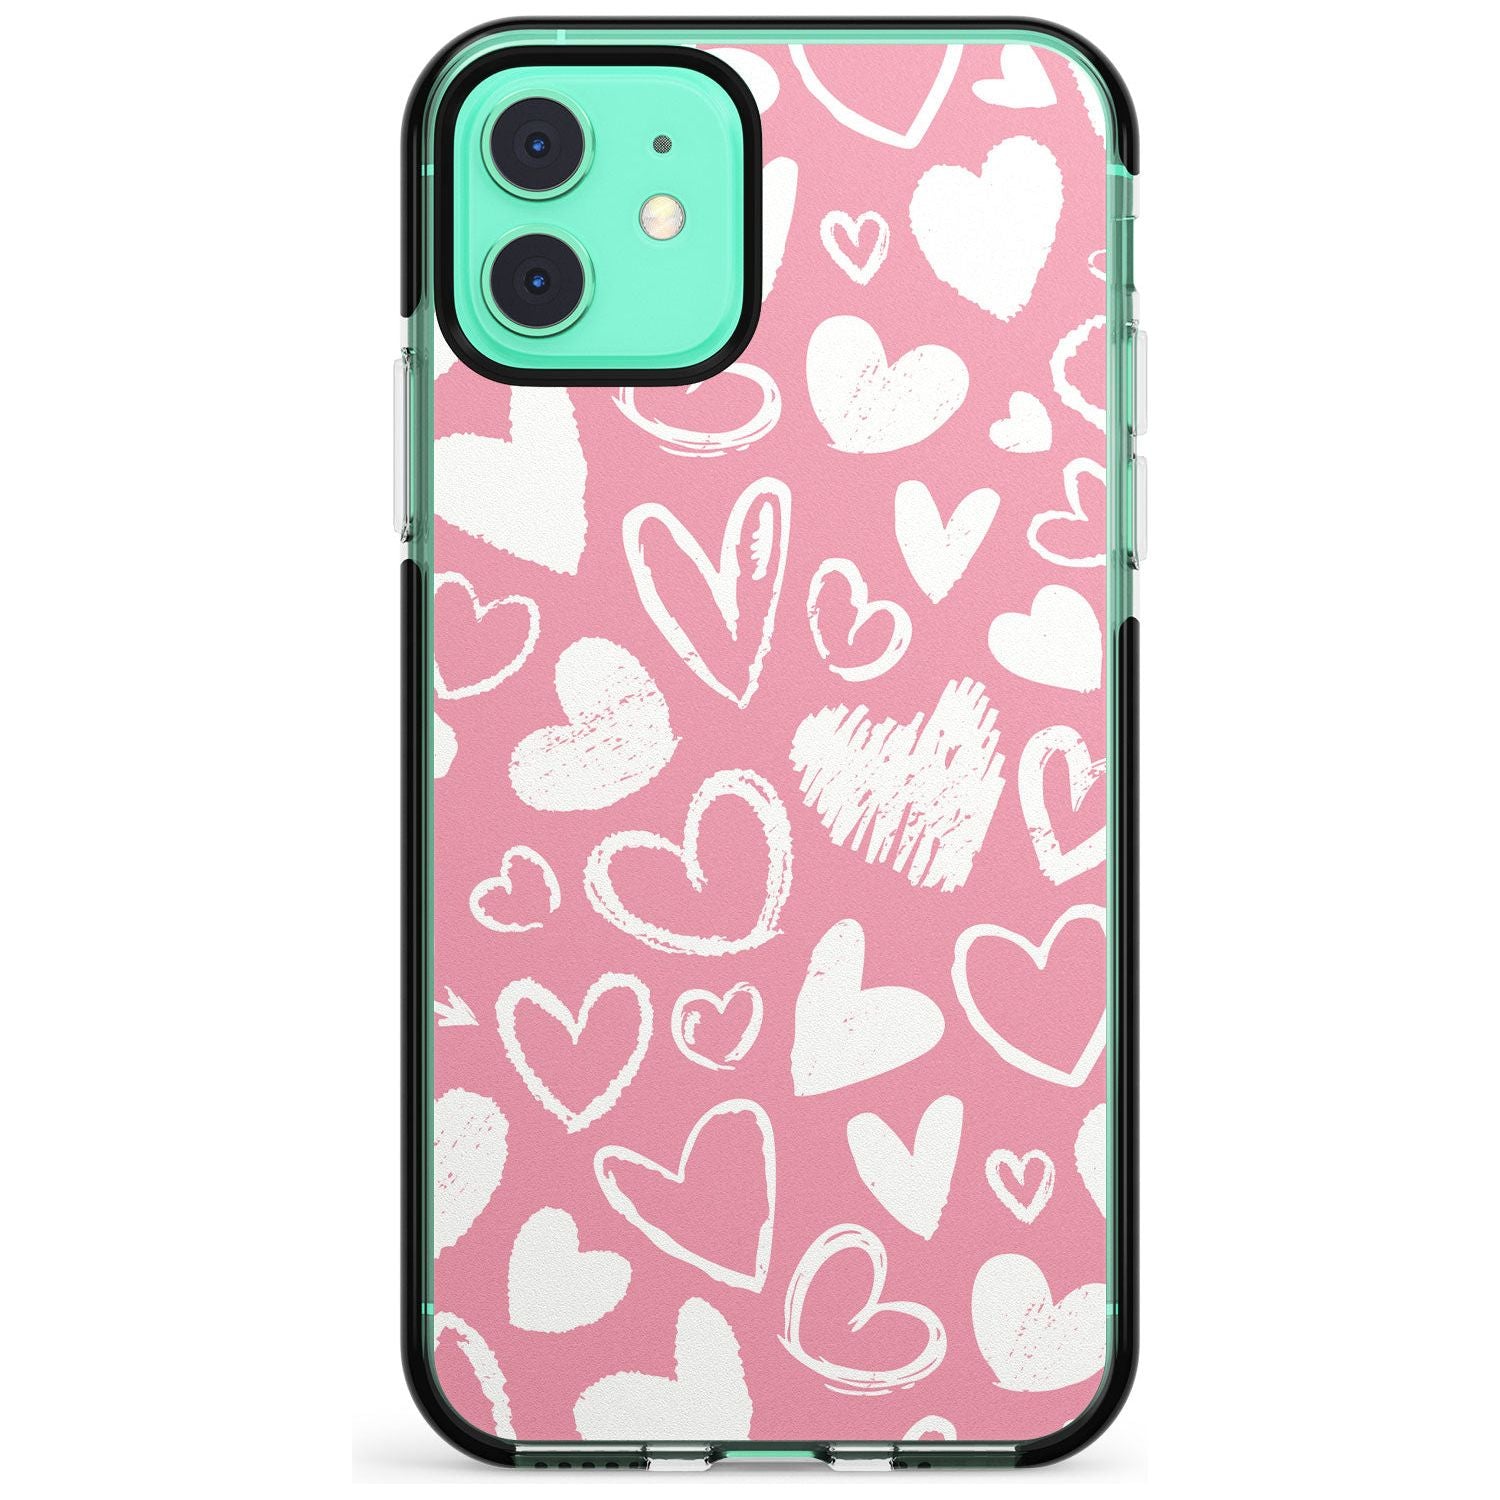 Chalk Hearts Black Impact Phone Case for iPhone 11 Pro Max